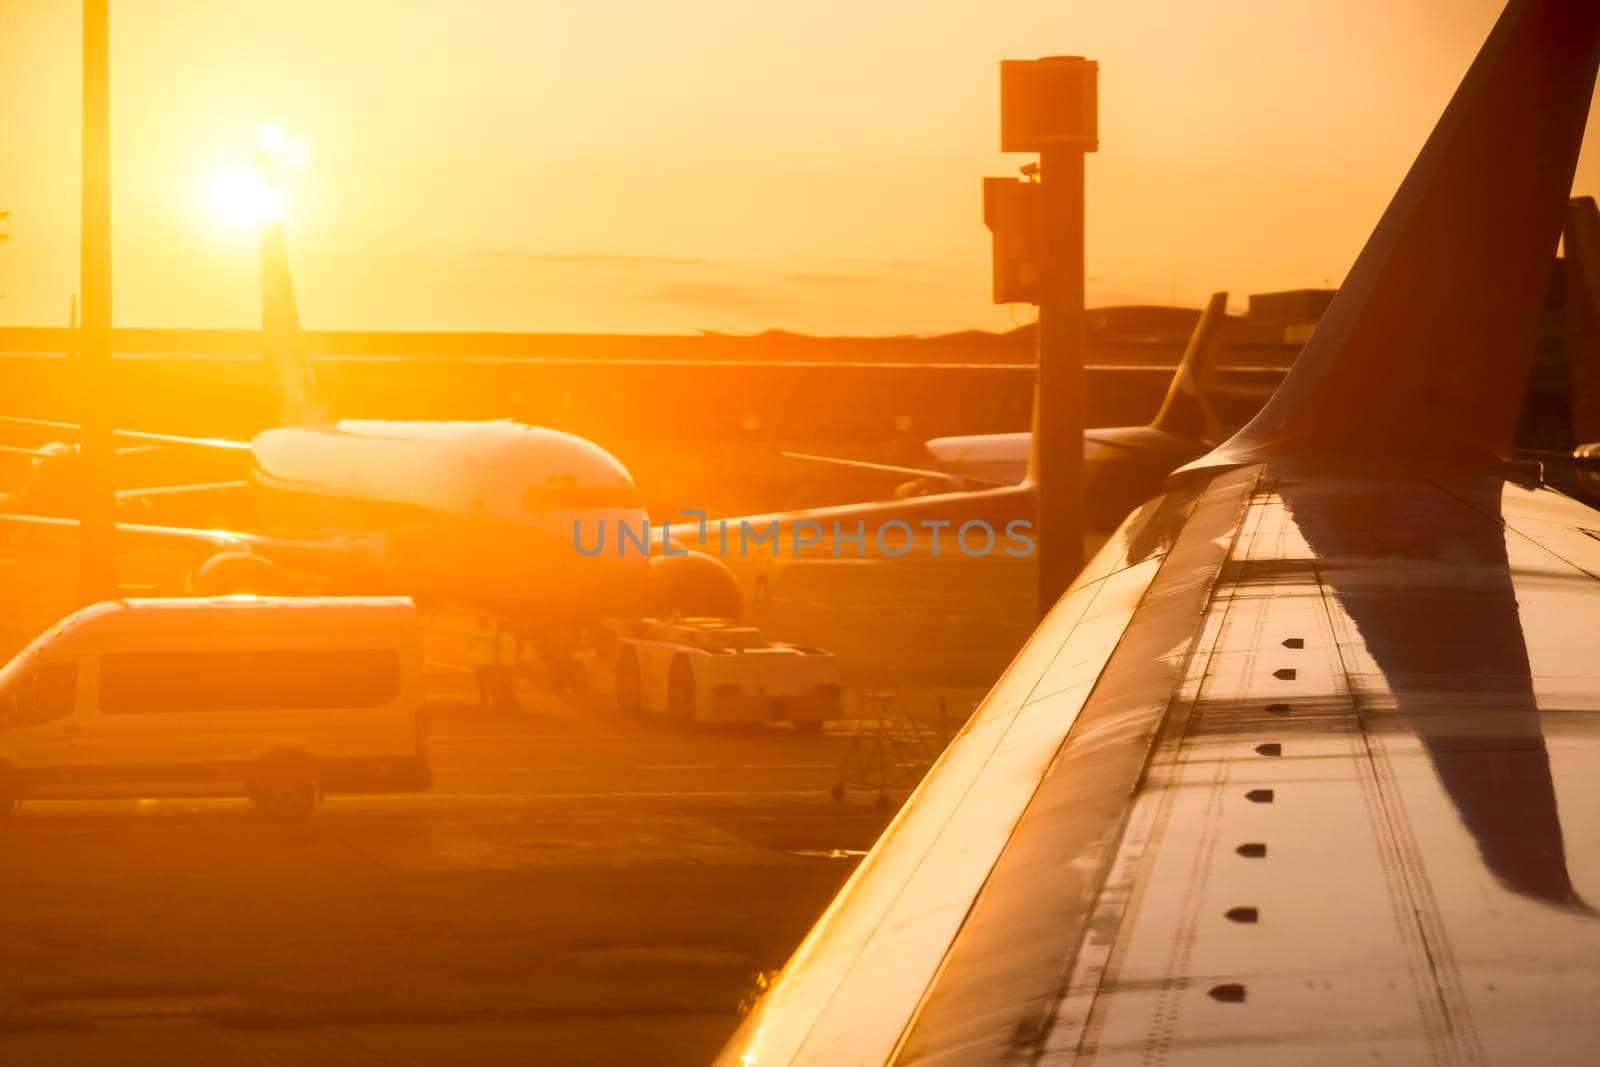 View from the plane window of the wing and other airplanes on the runway at sunset, travel and fly to the journey.